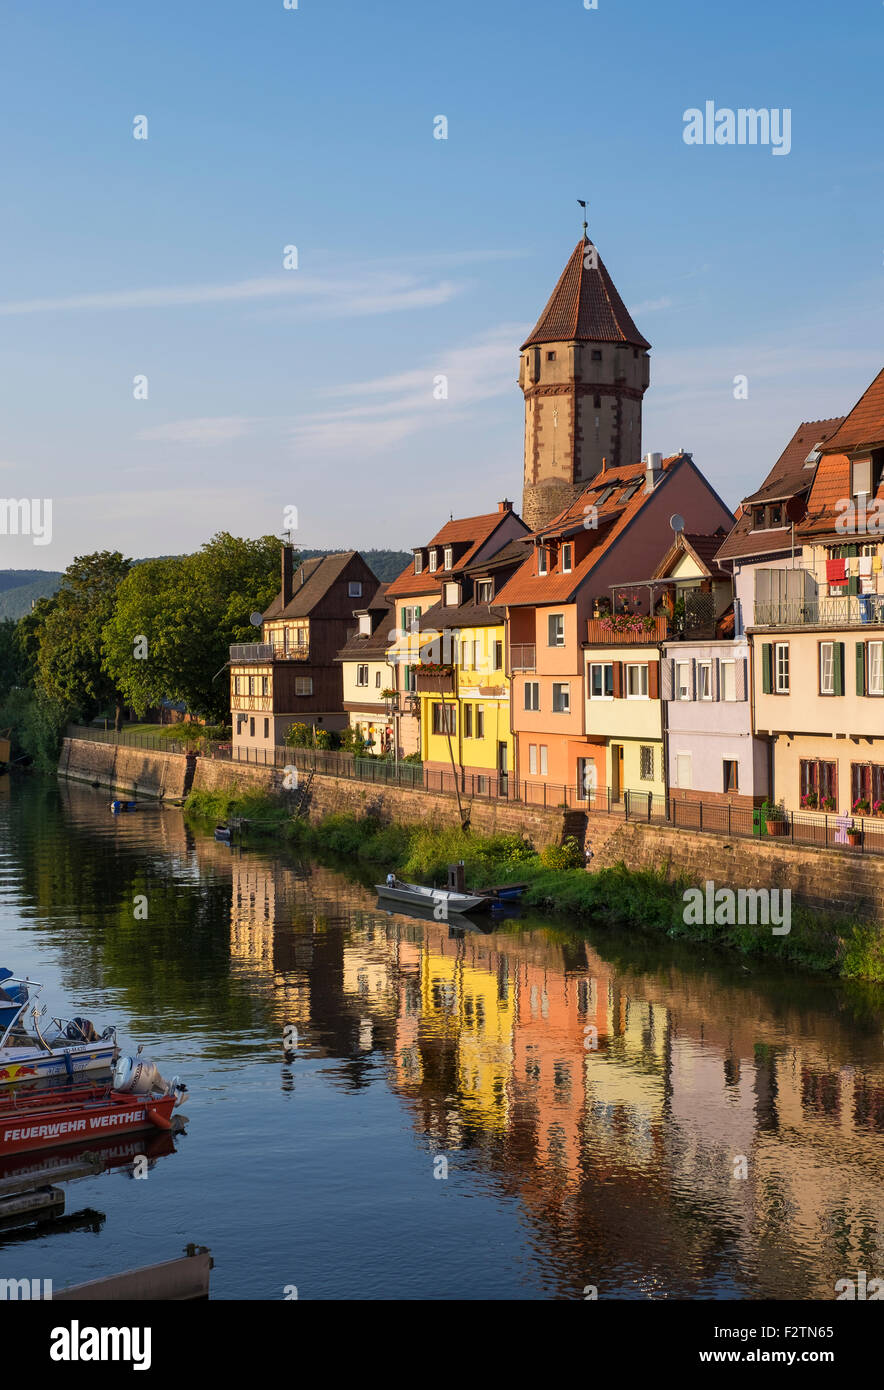 Tauber River and Spitzer Turm tower, Wertheim, Baden-Württemberg, Germany Stock Photo